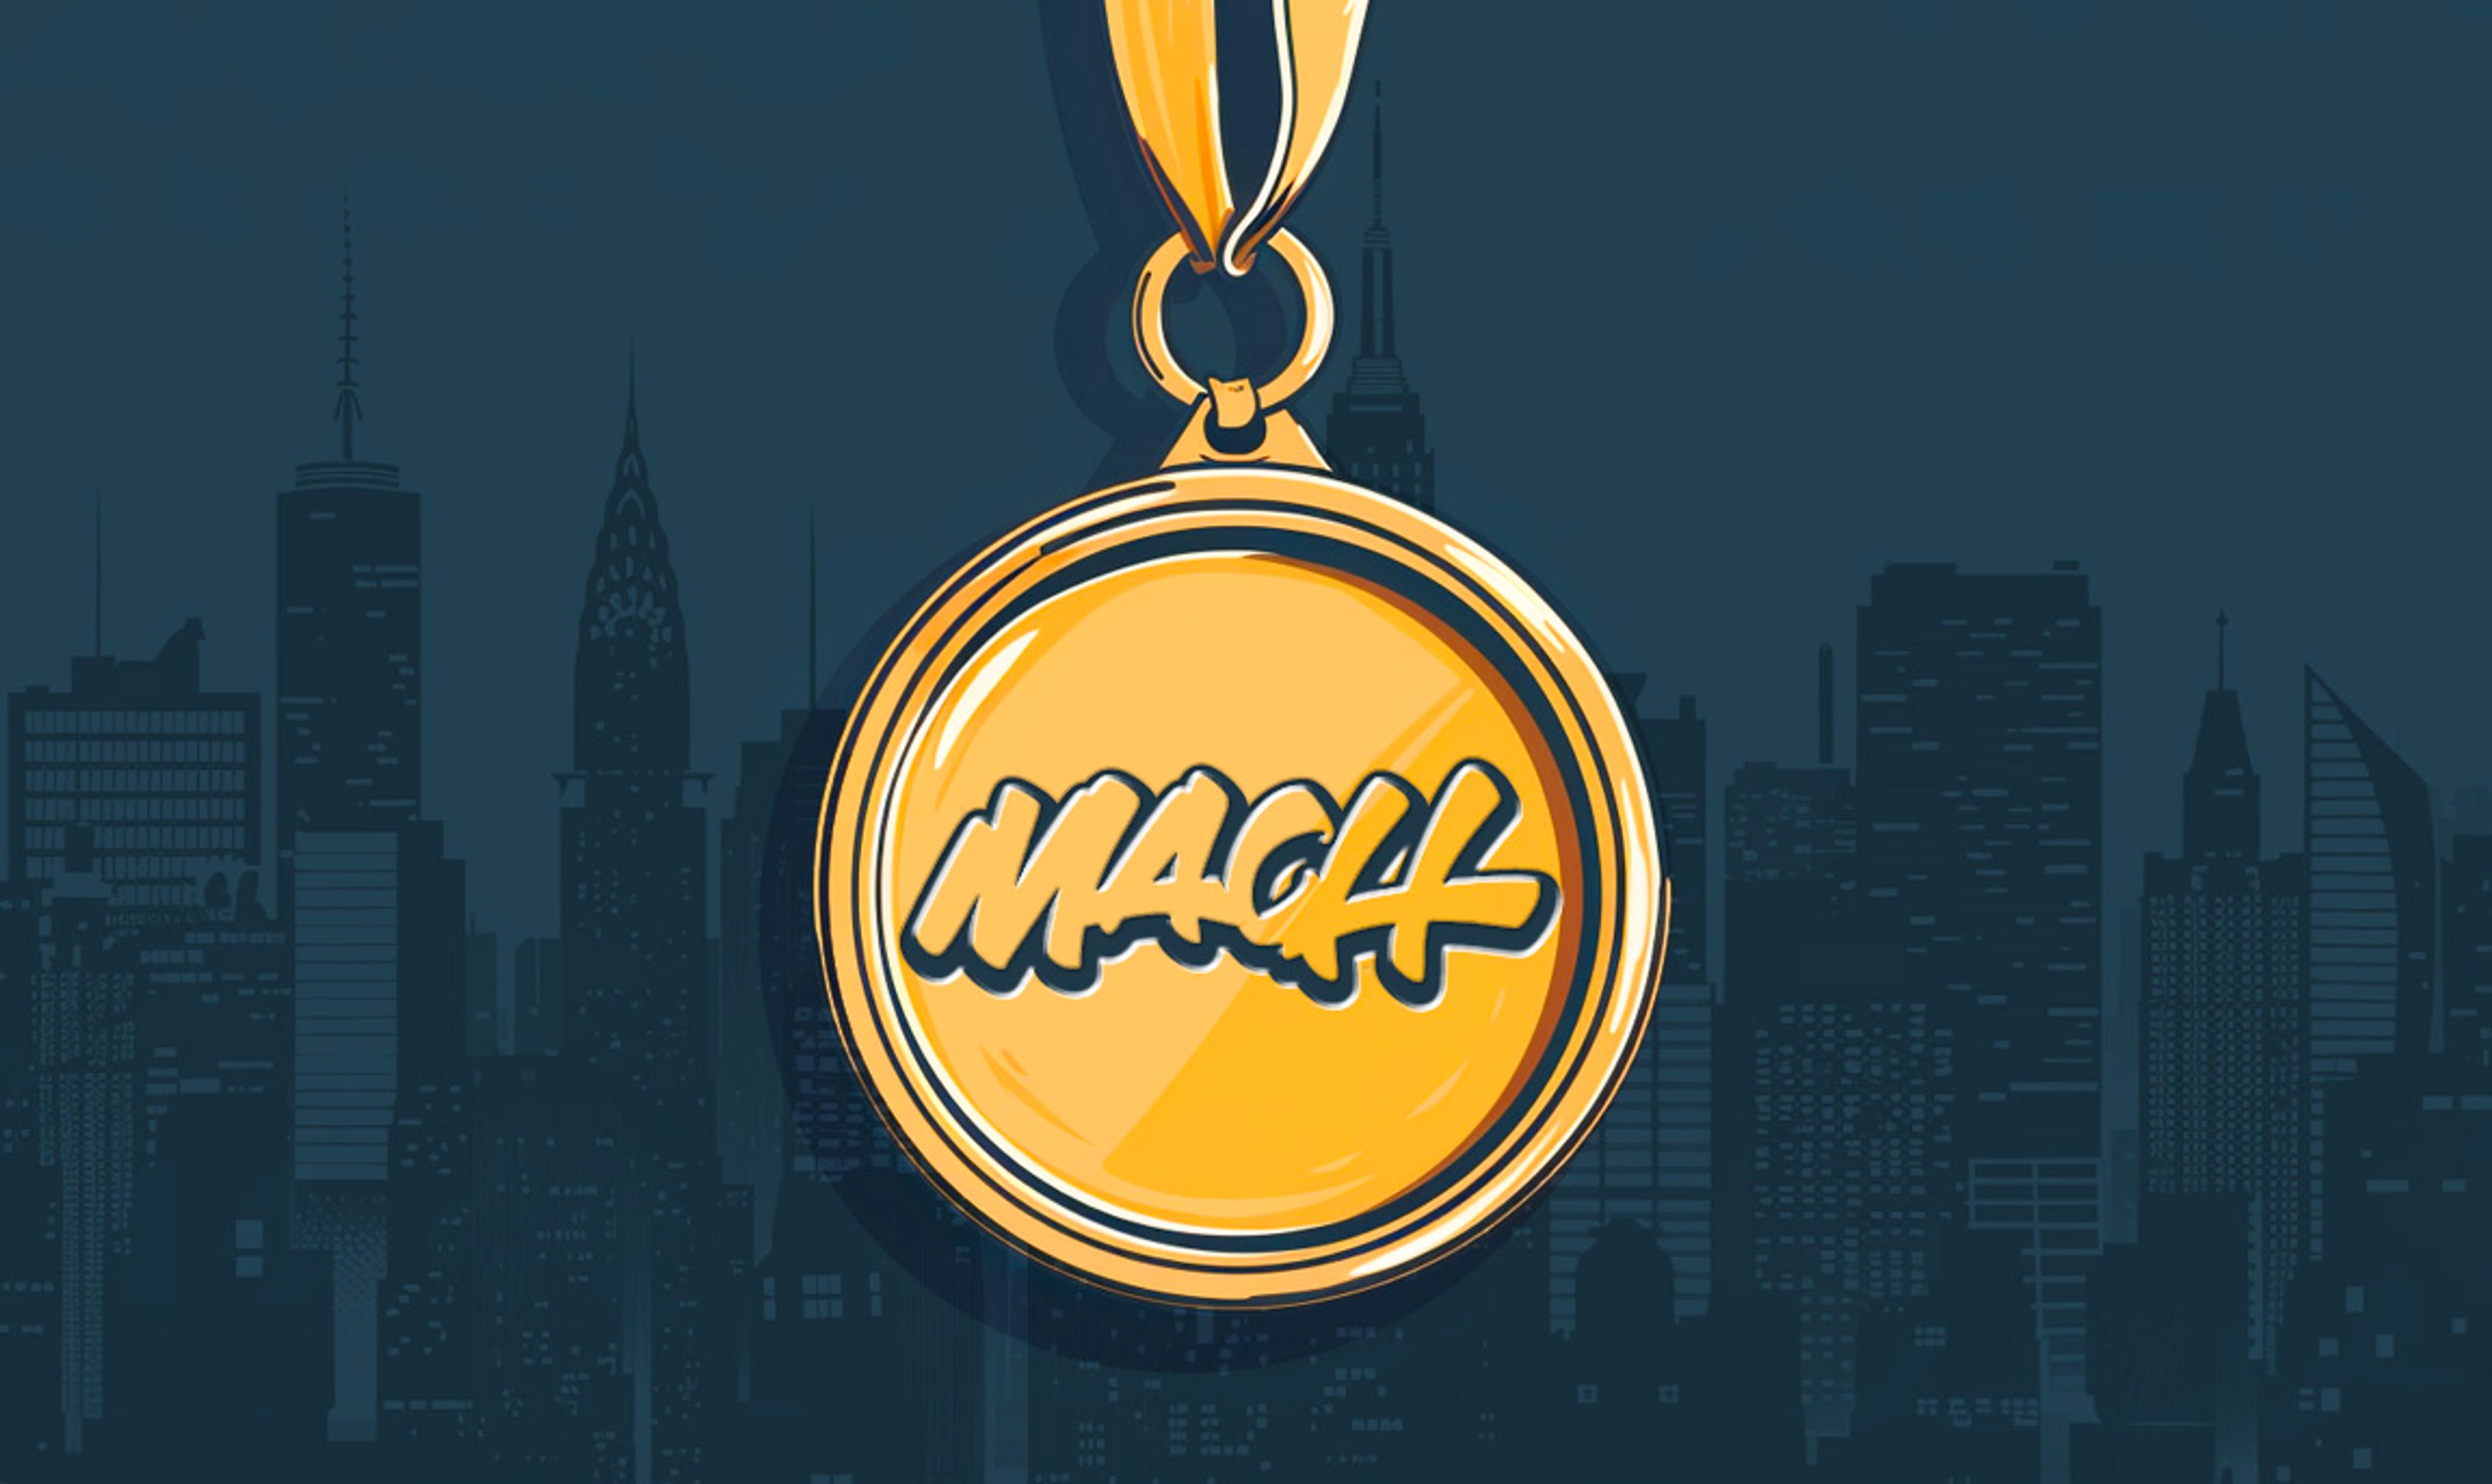 A graphical image of a medal with the word "MACH" embossed on it, and a city skyline faintly in the background.